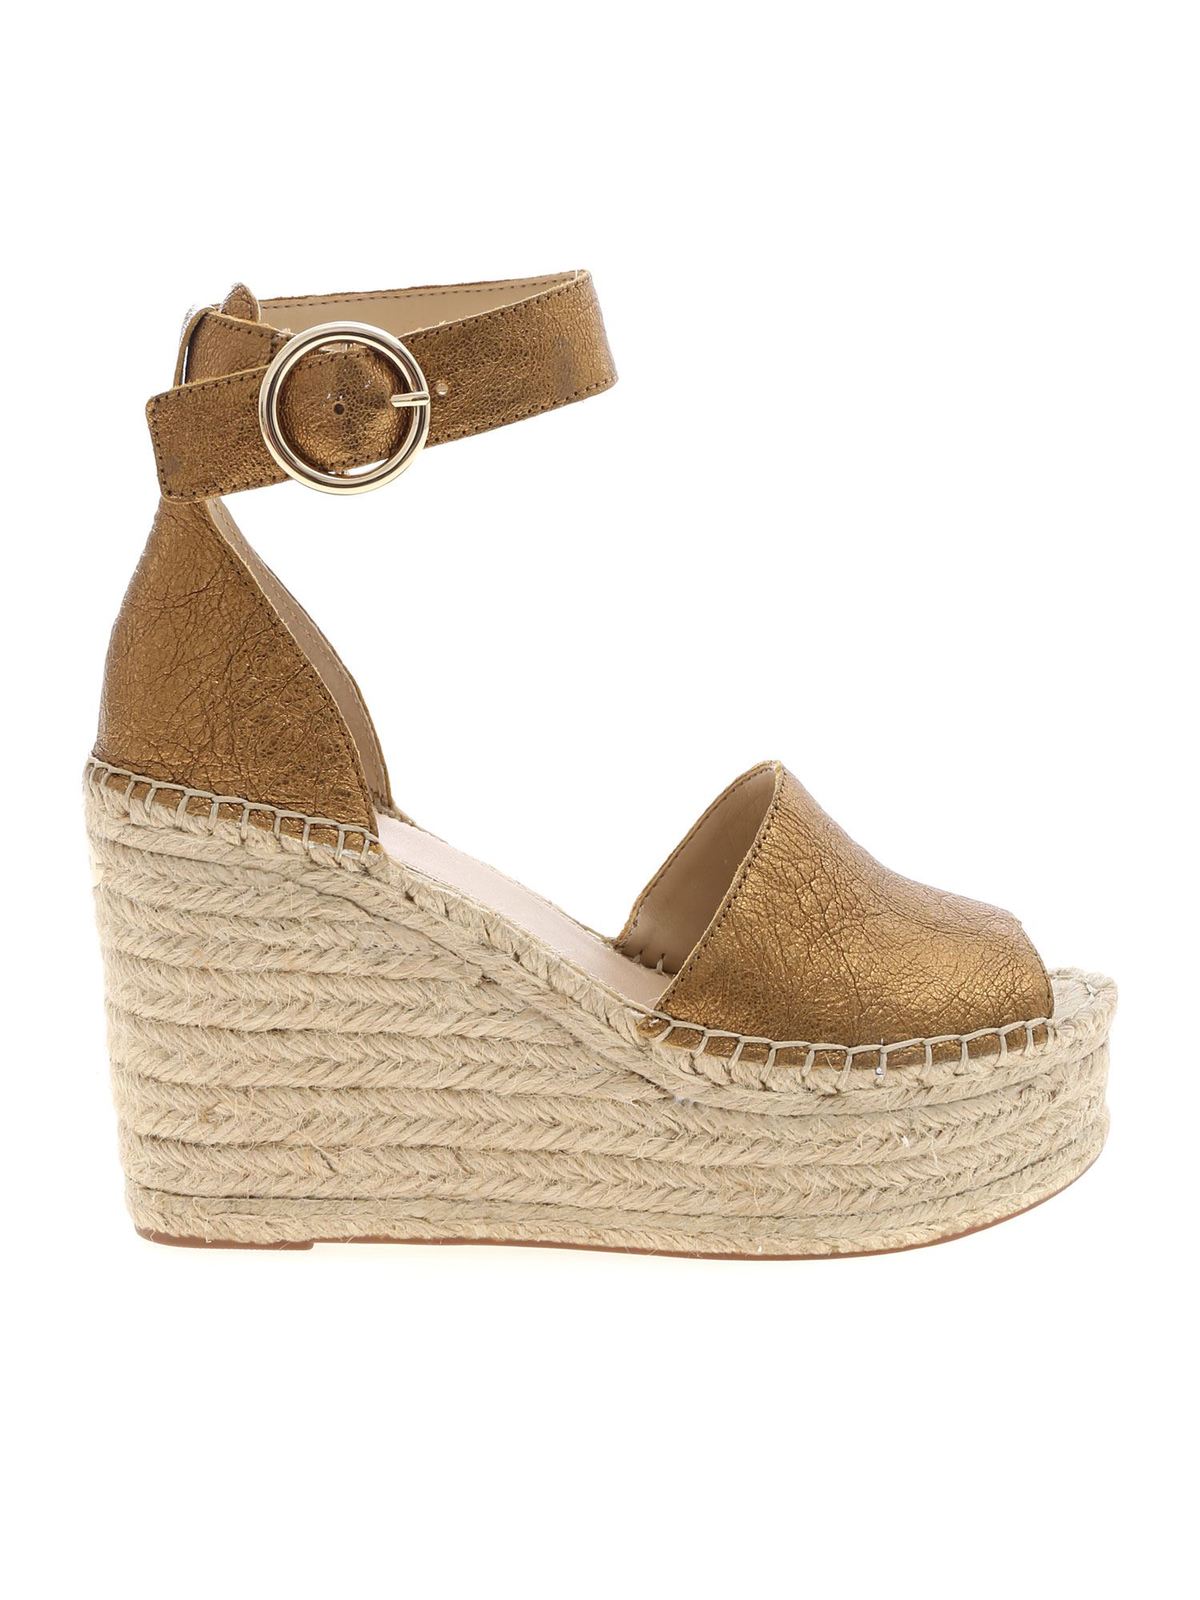 guess tan wedges